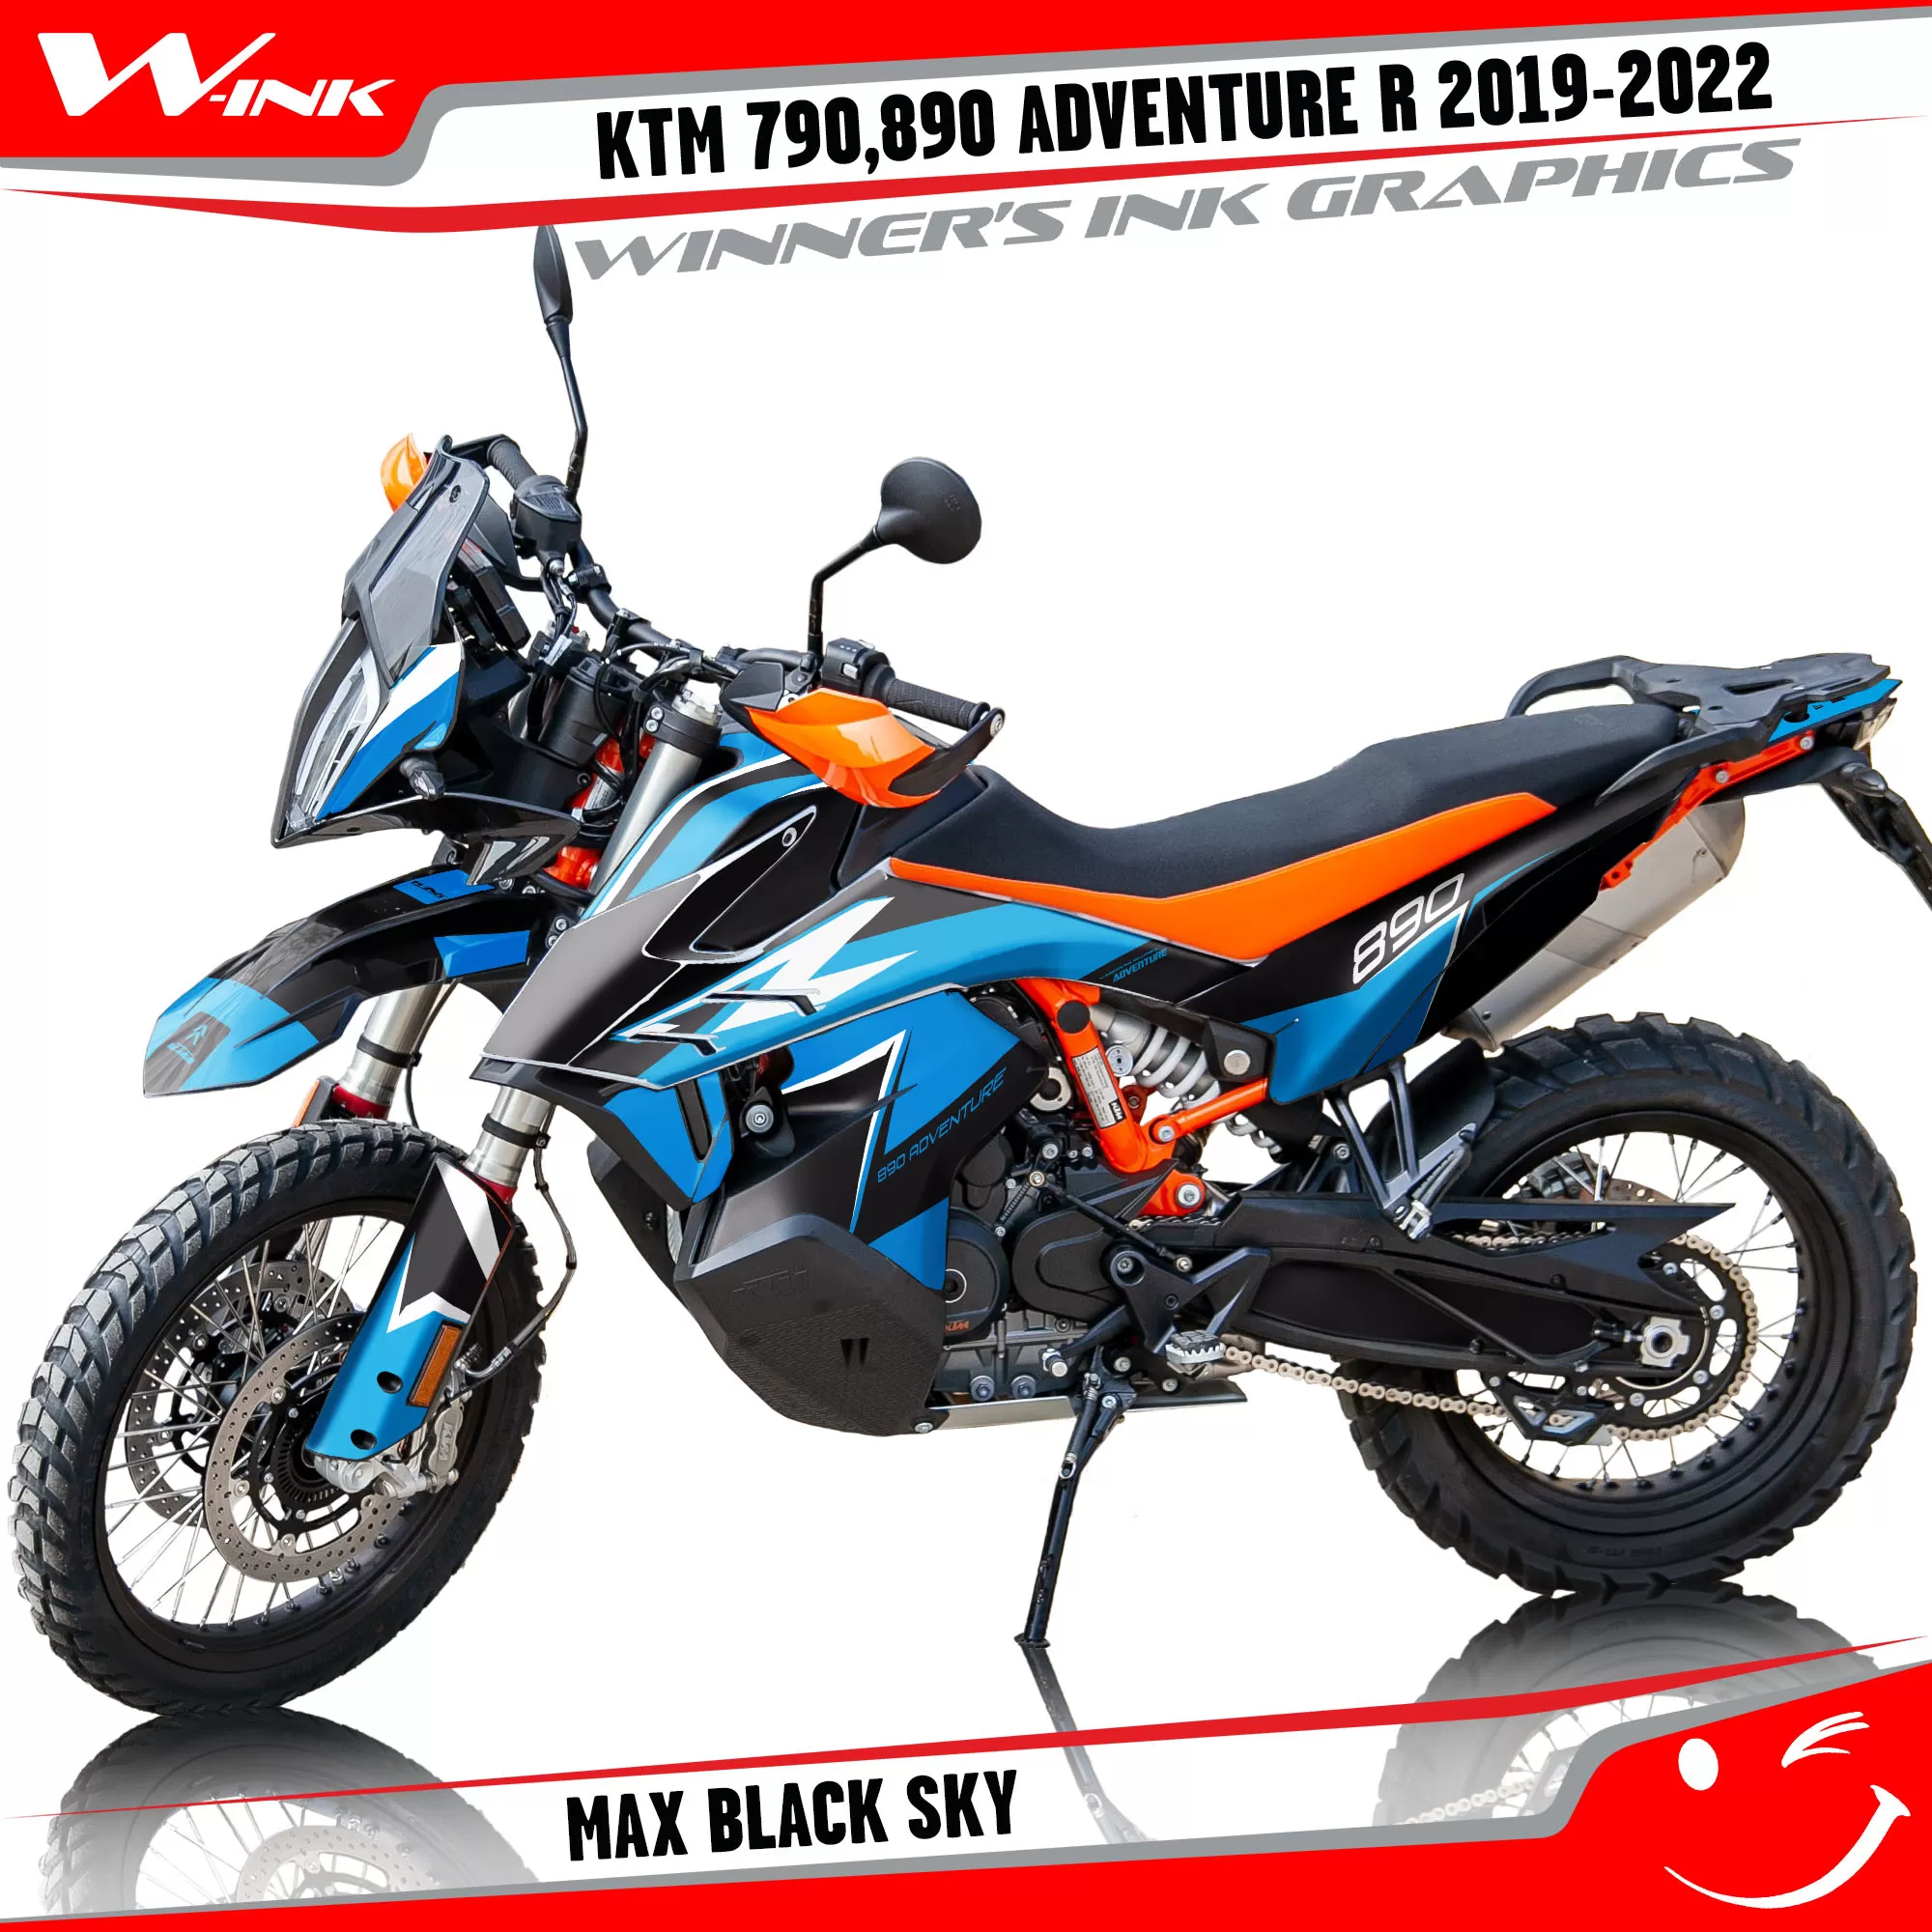 Adventure-R-790-890-2019-2020-2021-2022-graphics-kit-and-decals-with-designs-Max-Black-Sky